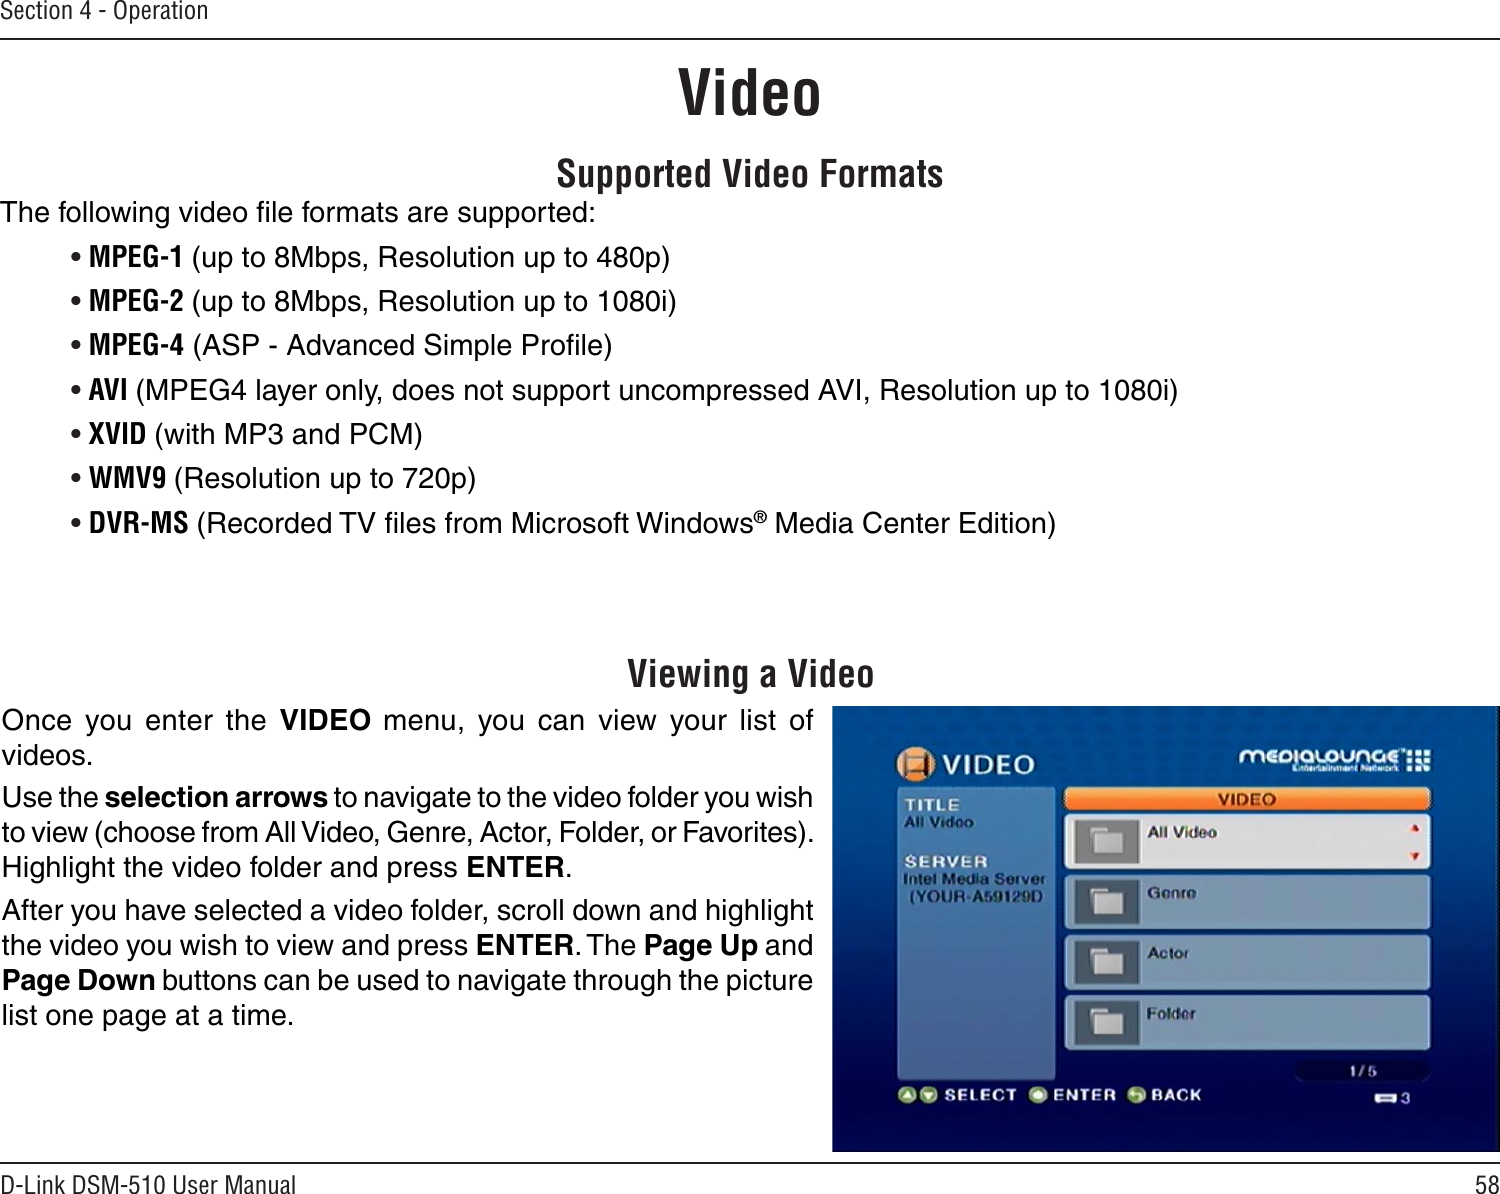 58D-Link DSM-510 User ManualSection 4 - OperationSupported Video FormatsThe following video ﬁle formats are supported:• MPEG-1 (up to 8Mbps, Resolution up to 480p)• MPEG-2 (up to 8Mbps, Resolution up to 1080i)• MPEG-4 (ASP - Advanced Simple Proﬁle) • AVI (MPEG4 layer only, does not support uncompressed AVI, Resolution up to 1080i)• XVID (with MP3 and PCM)• WMV9 (Resolution up to 720p)• DVR-MS (Recorded TV ﬁles from Microsoft Windows® Media Center Edition)Viewing a VideoOnce  you  enter  the  VIDEO menu,  you  can  view  your  list  of videos. Use the selection arrows to navigate to the video folder you wish to view (choose from All Video, Genre, Actor, Folder, or Favorites). Highlight the video folder and press ENTER.After you have selected a video folder, scroll down and highlight the video you wish to view and press ENTER. The Page Up and Page Down buttons can be used to navigate through the picture list one page at a time.Video